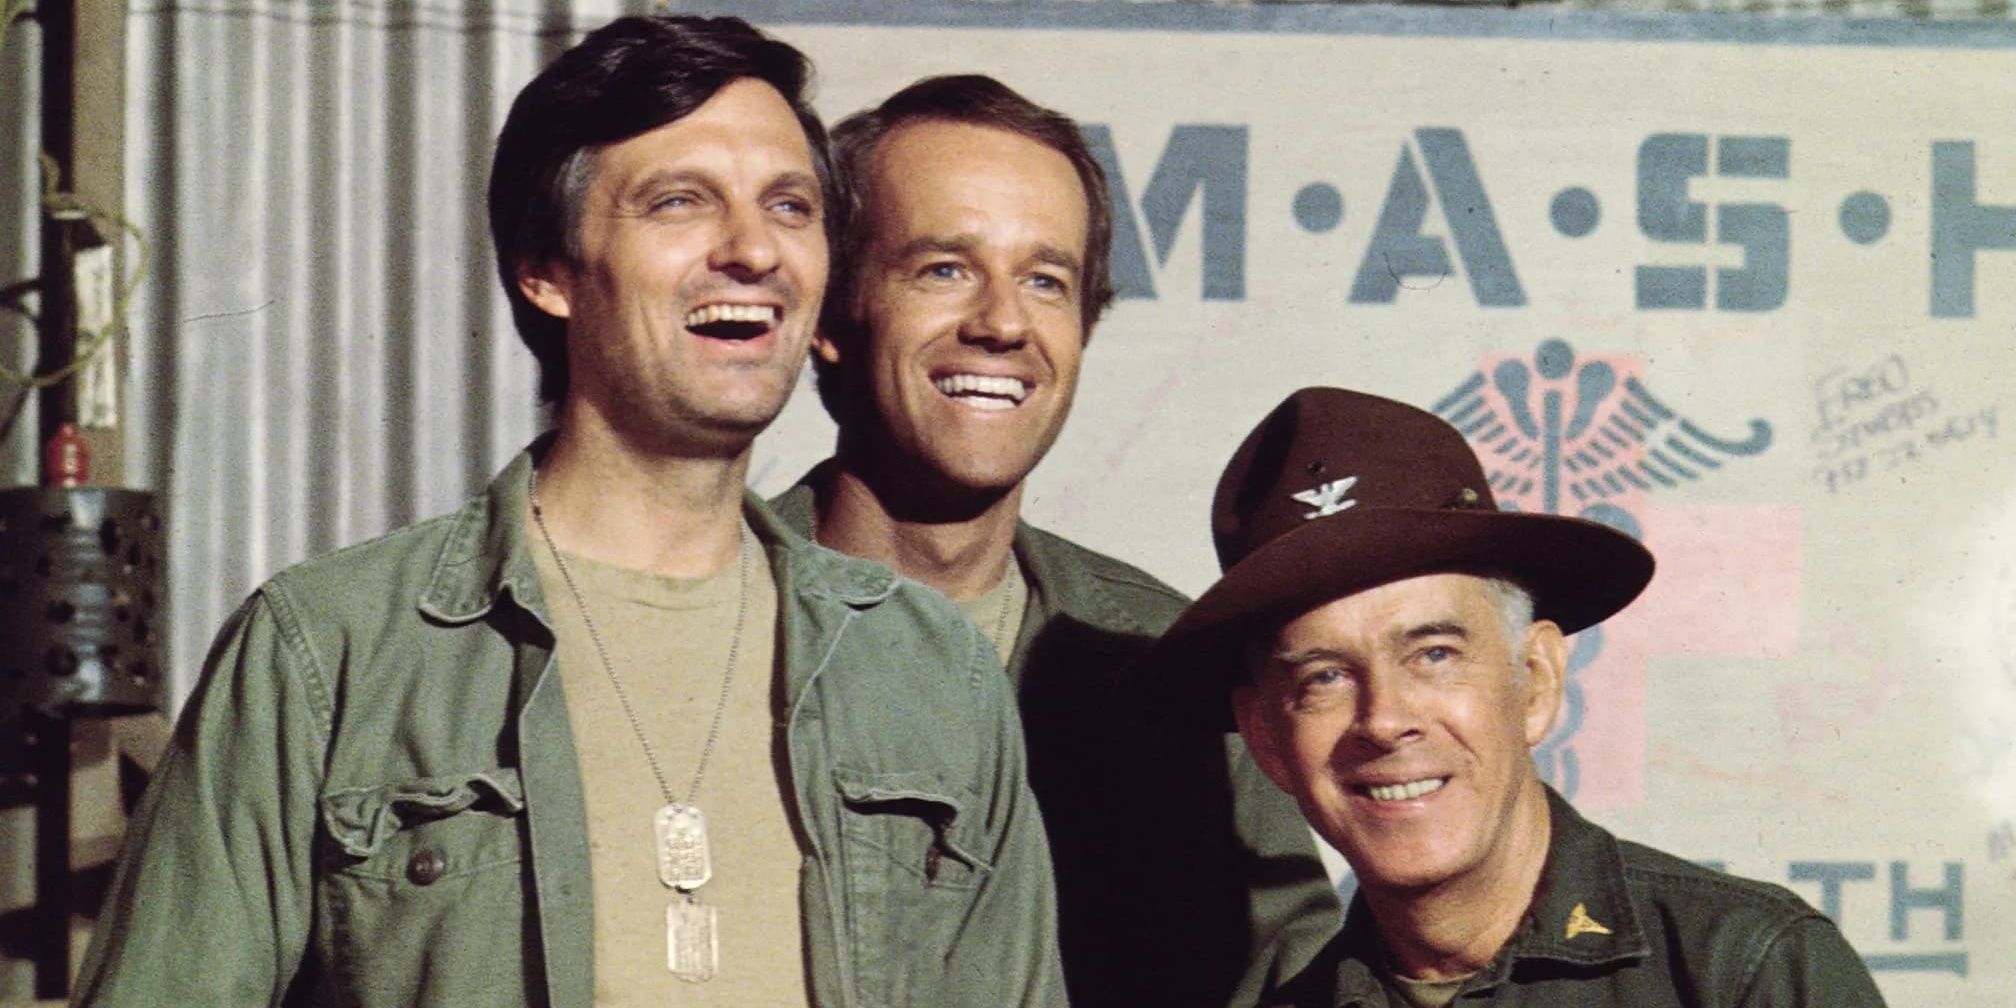 Hawkeye and friends have a laugh in M*A*S*H